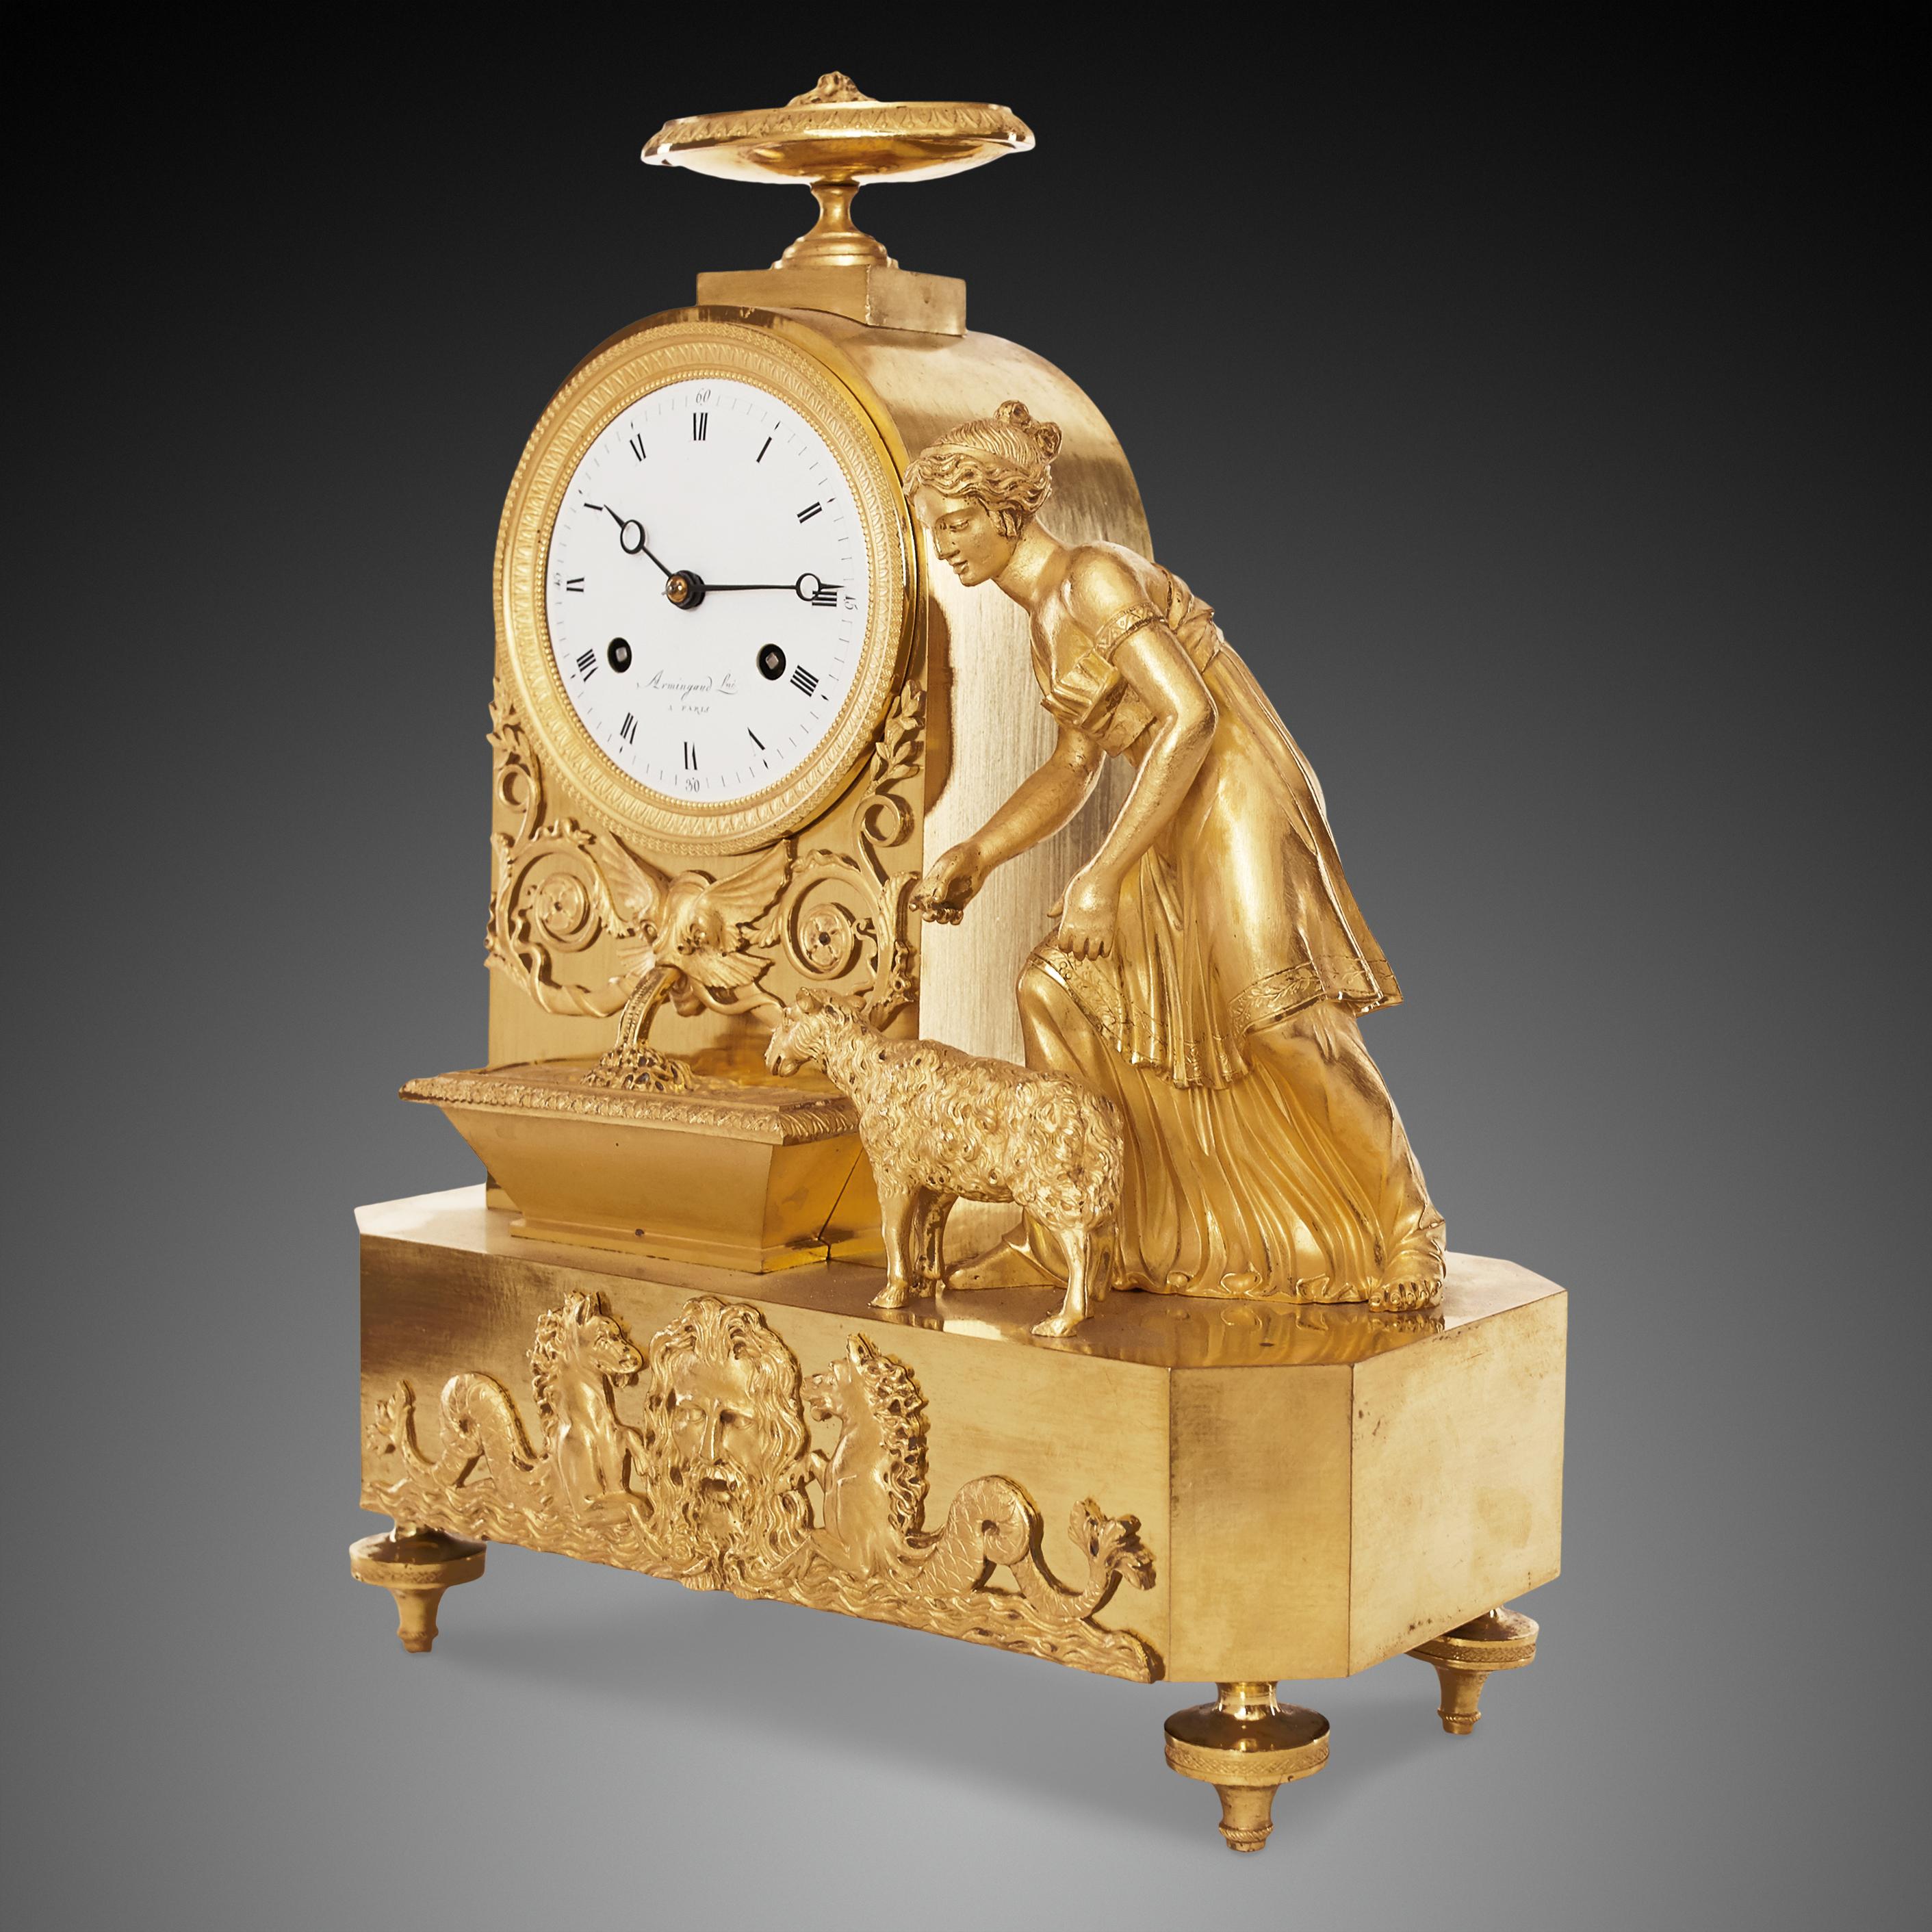 Early 19th century Empire clock crafted of gilt bronze, or ormolu, featuring a shepherd girl is feeding her sheep by the fountain. Below is the face of the sea god Poseidon and 2 mythical sea horses. The dial signed Armingaud a Paris
The clock